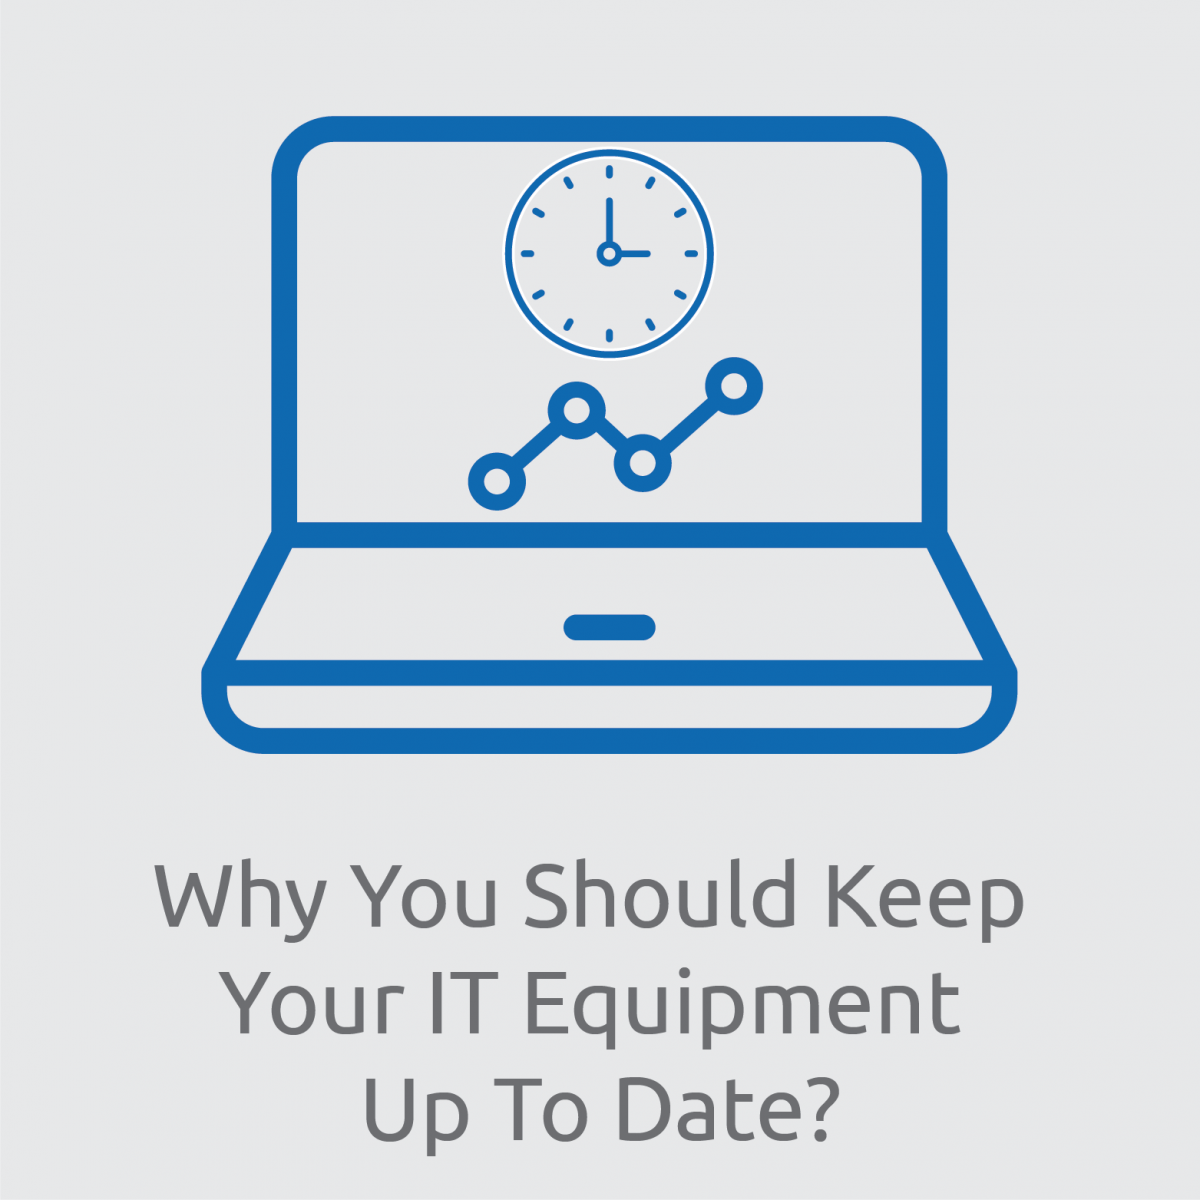 Why You Should Keep Your IT Equipment Up to Date